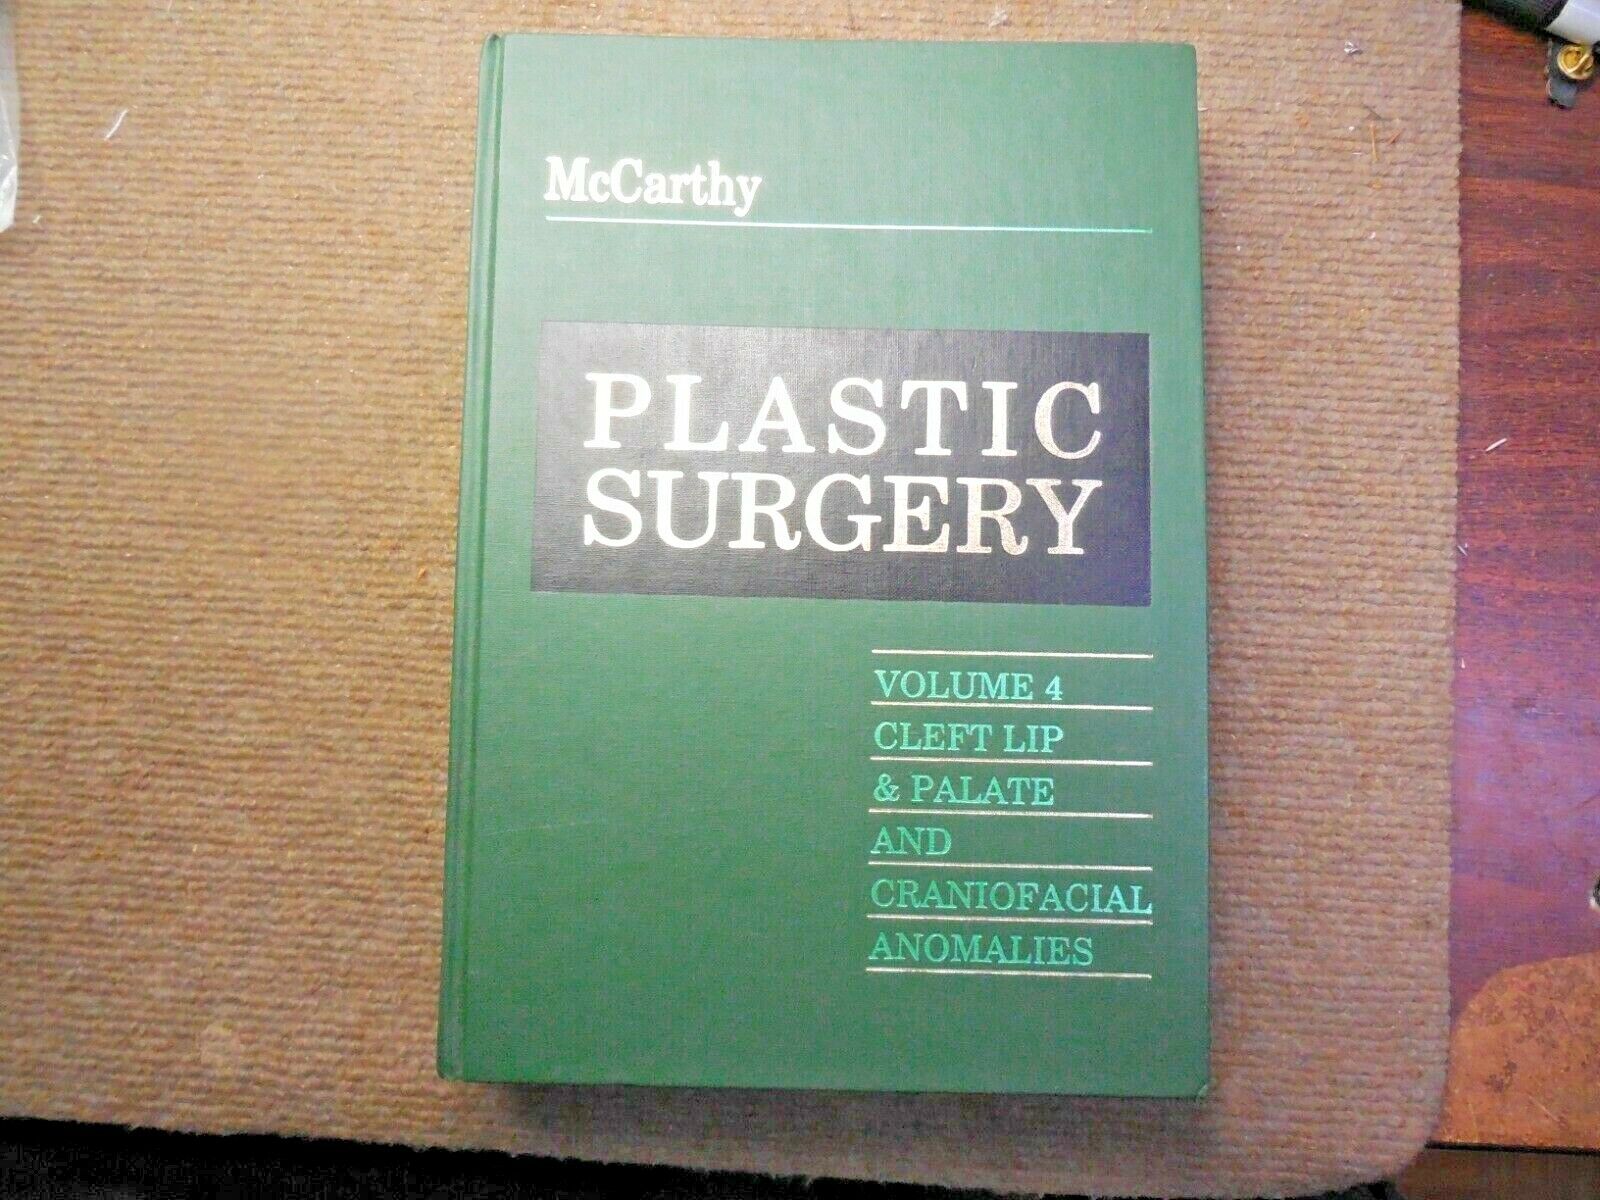 1990 Medical Reference Plastic Surgery Cleft Lip & Palate By McCarthy Volume 4